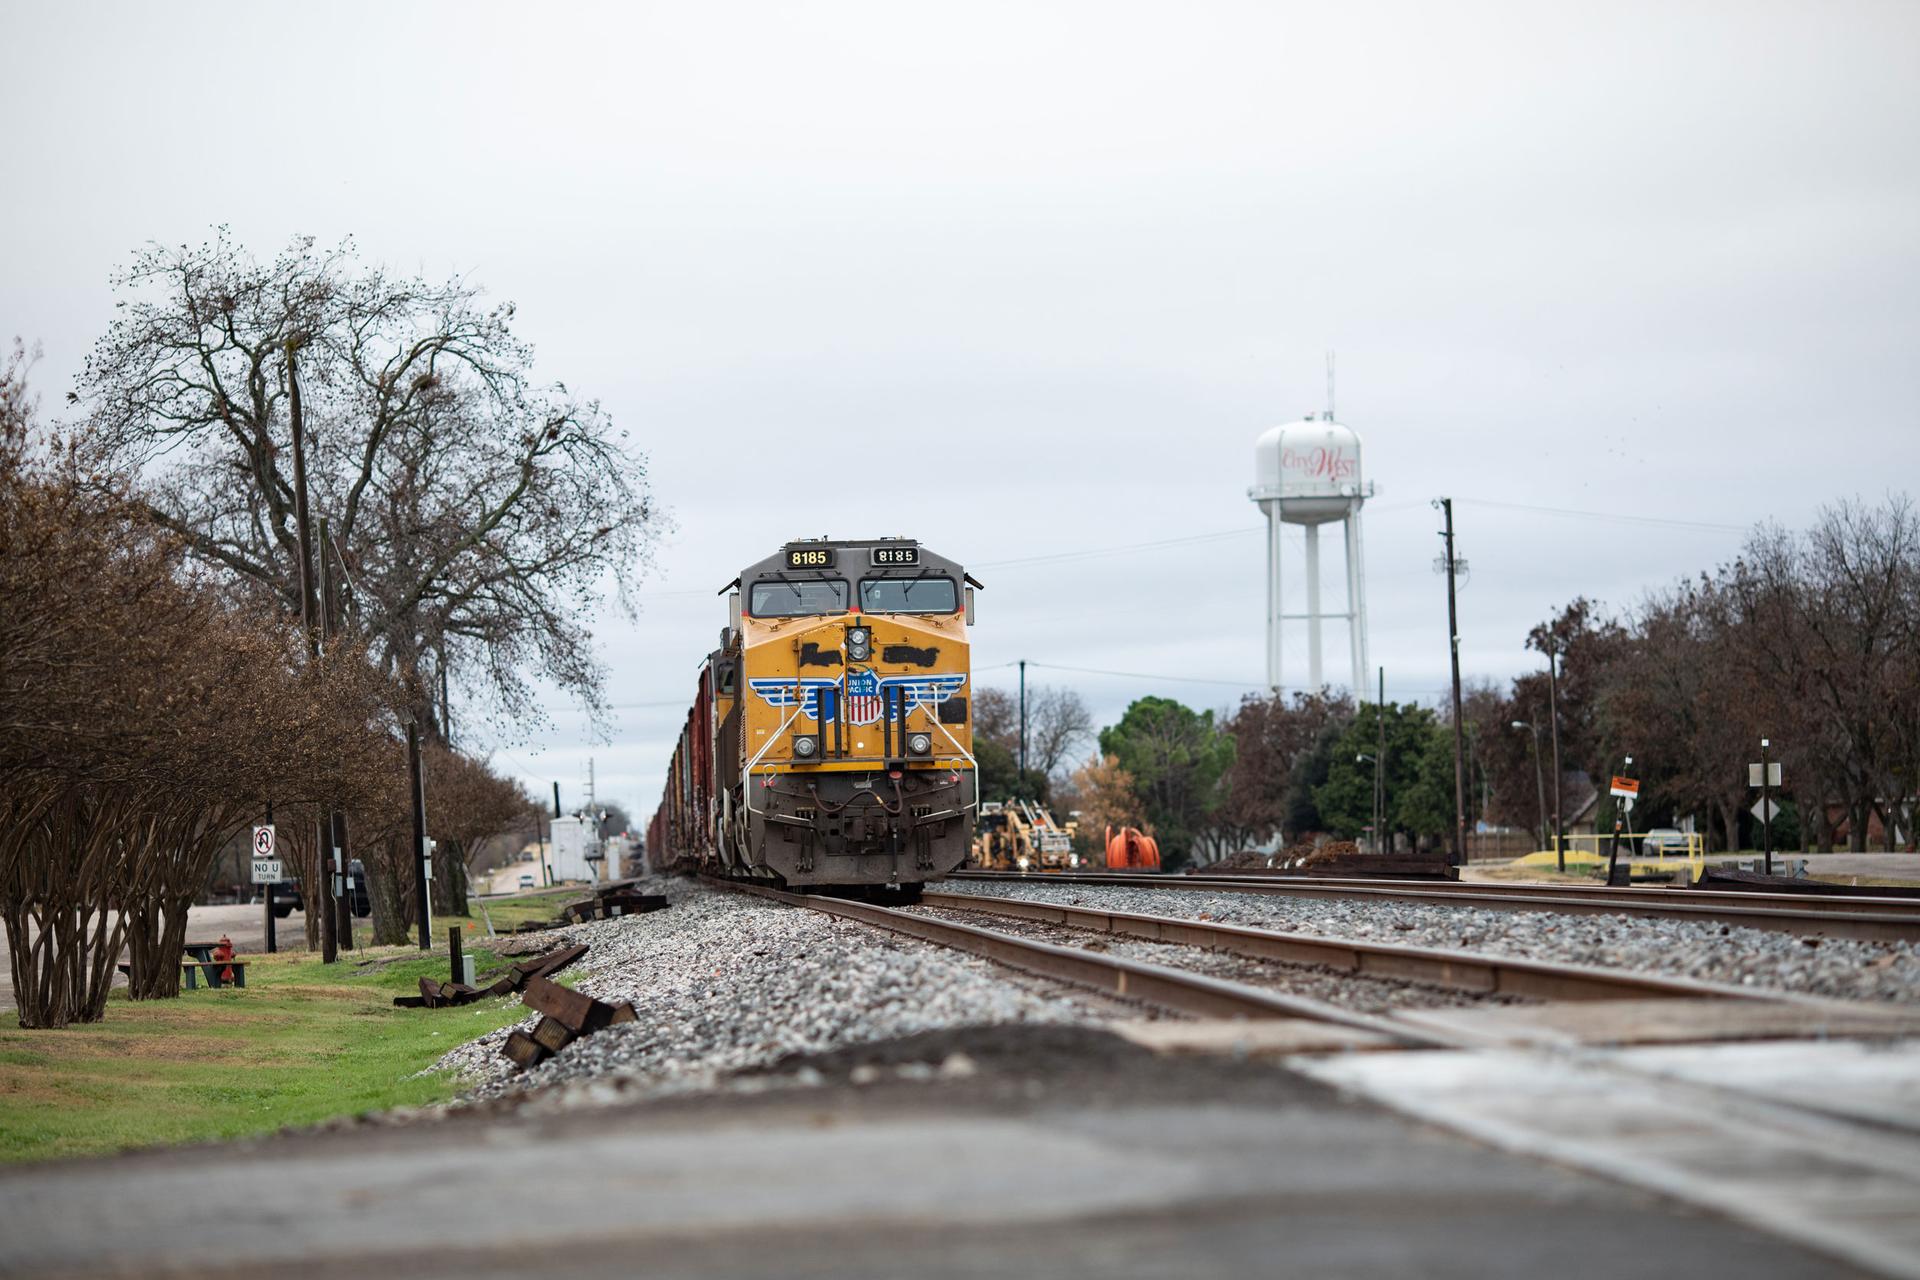 A yellow freight train is shown with a water tower in the background.